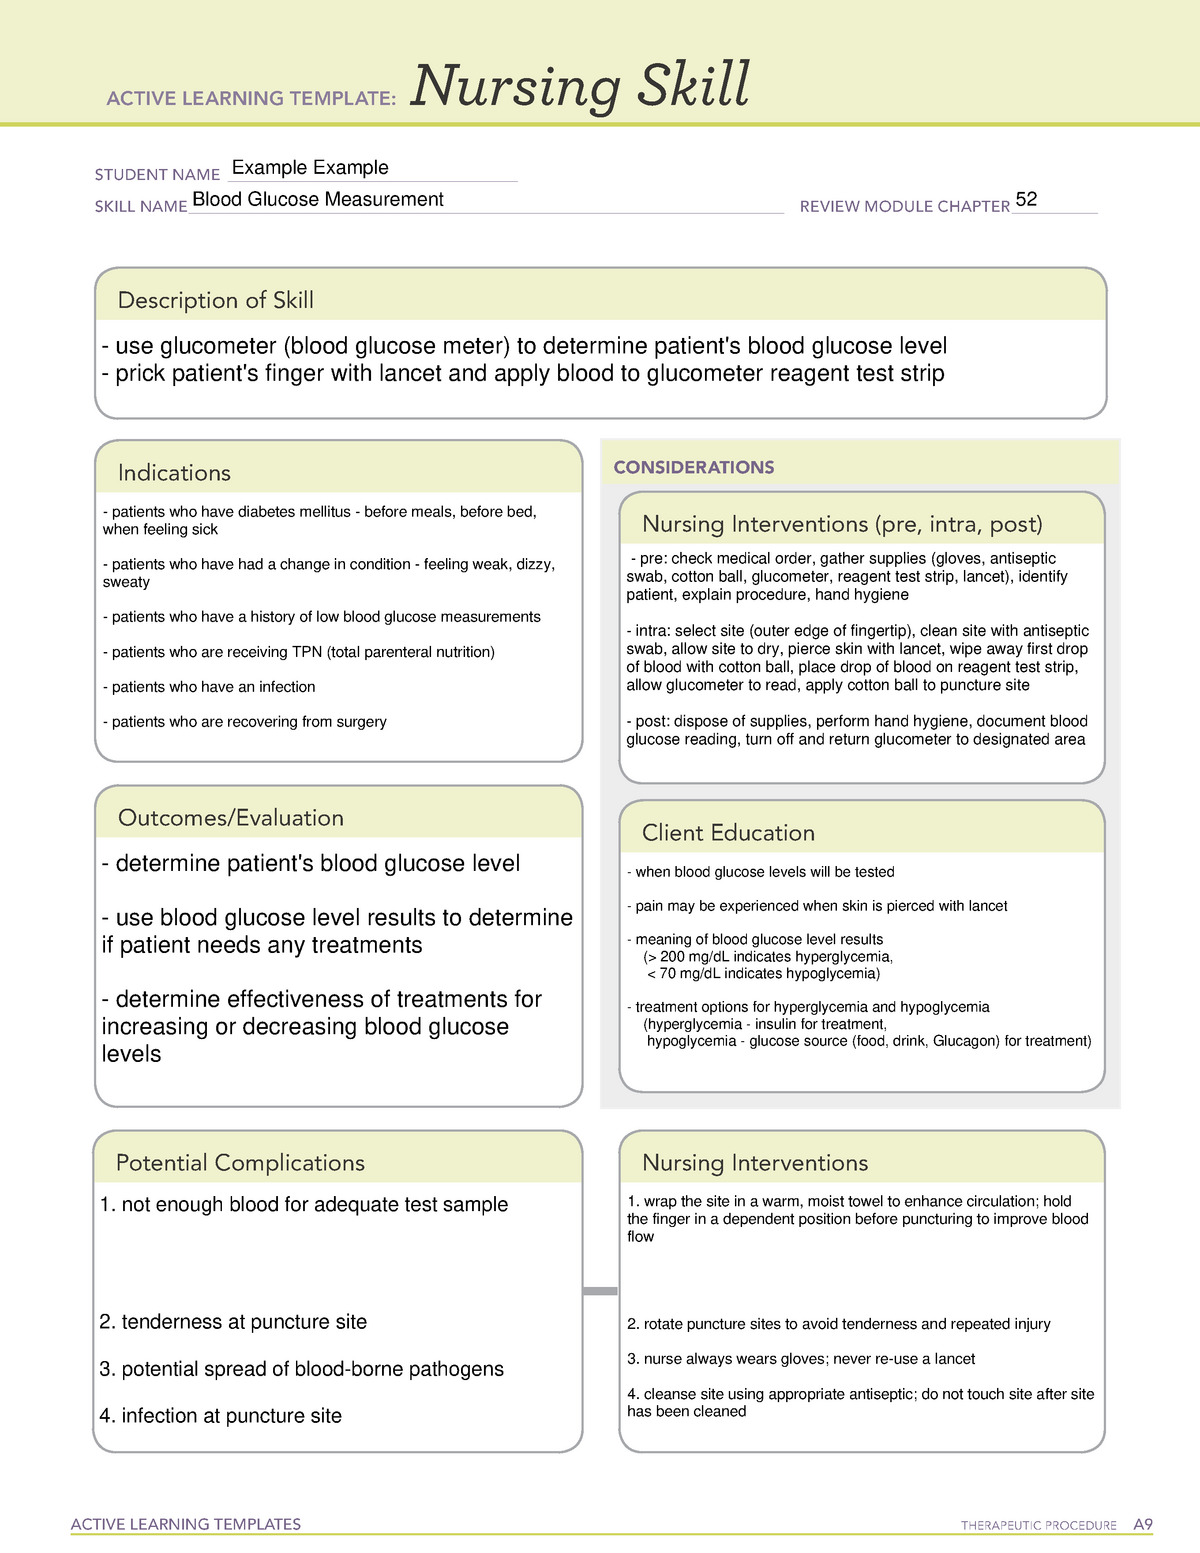 active-learning-template-nursing-skill-form-active-learning-templates